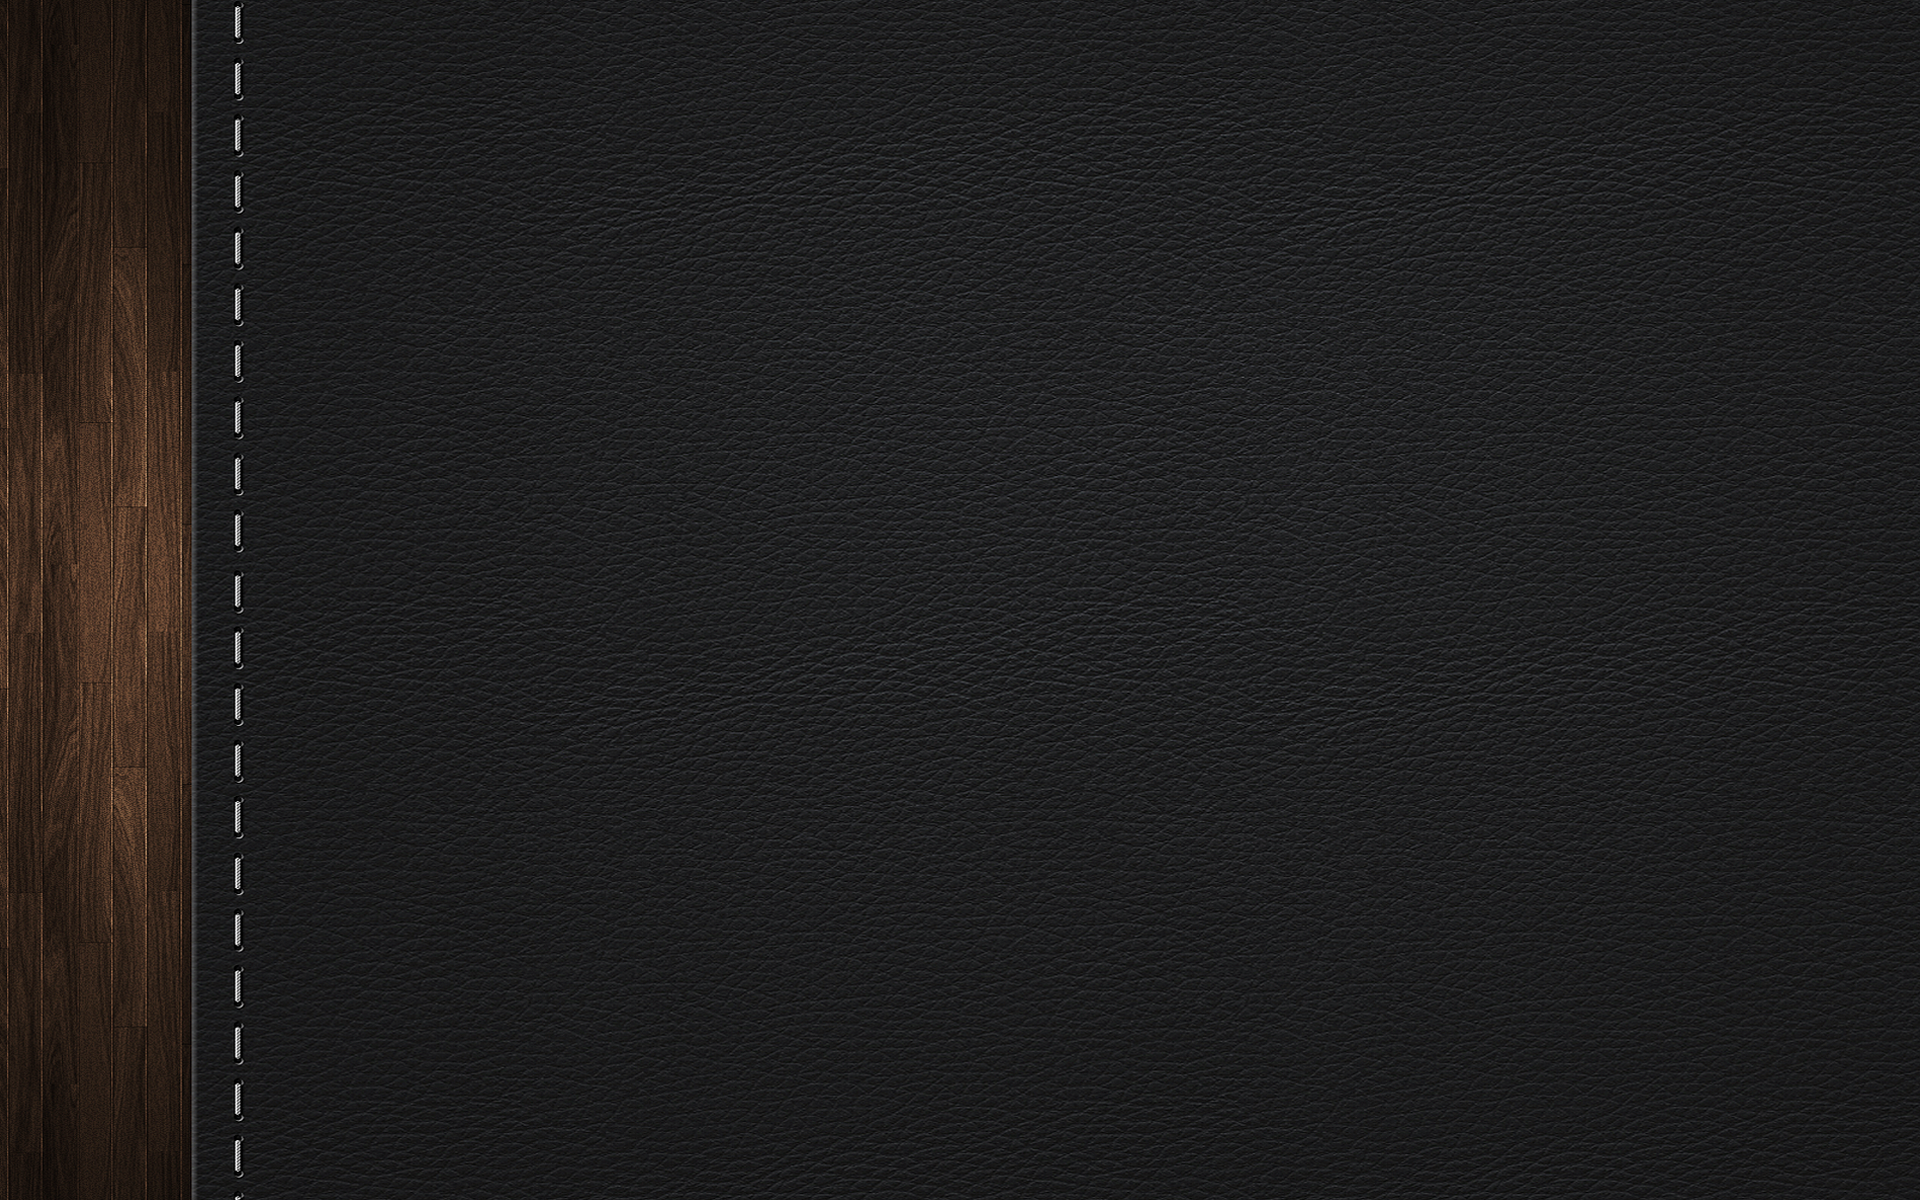 Black Leather Wallpapers